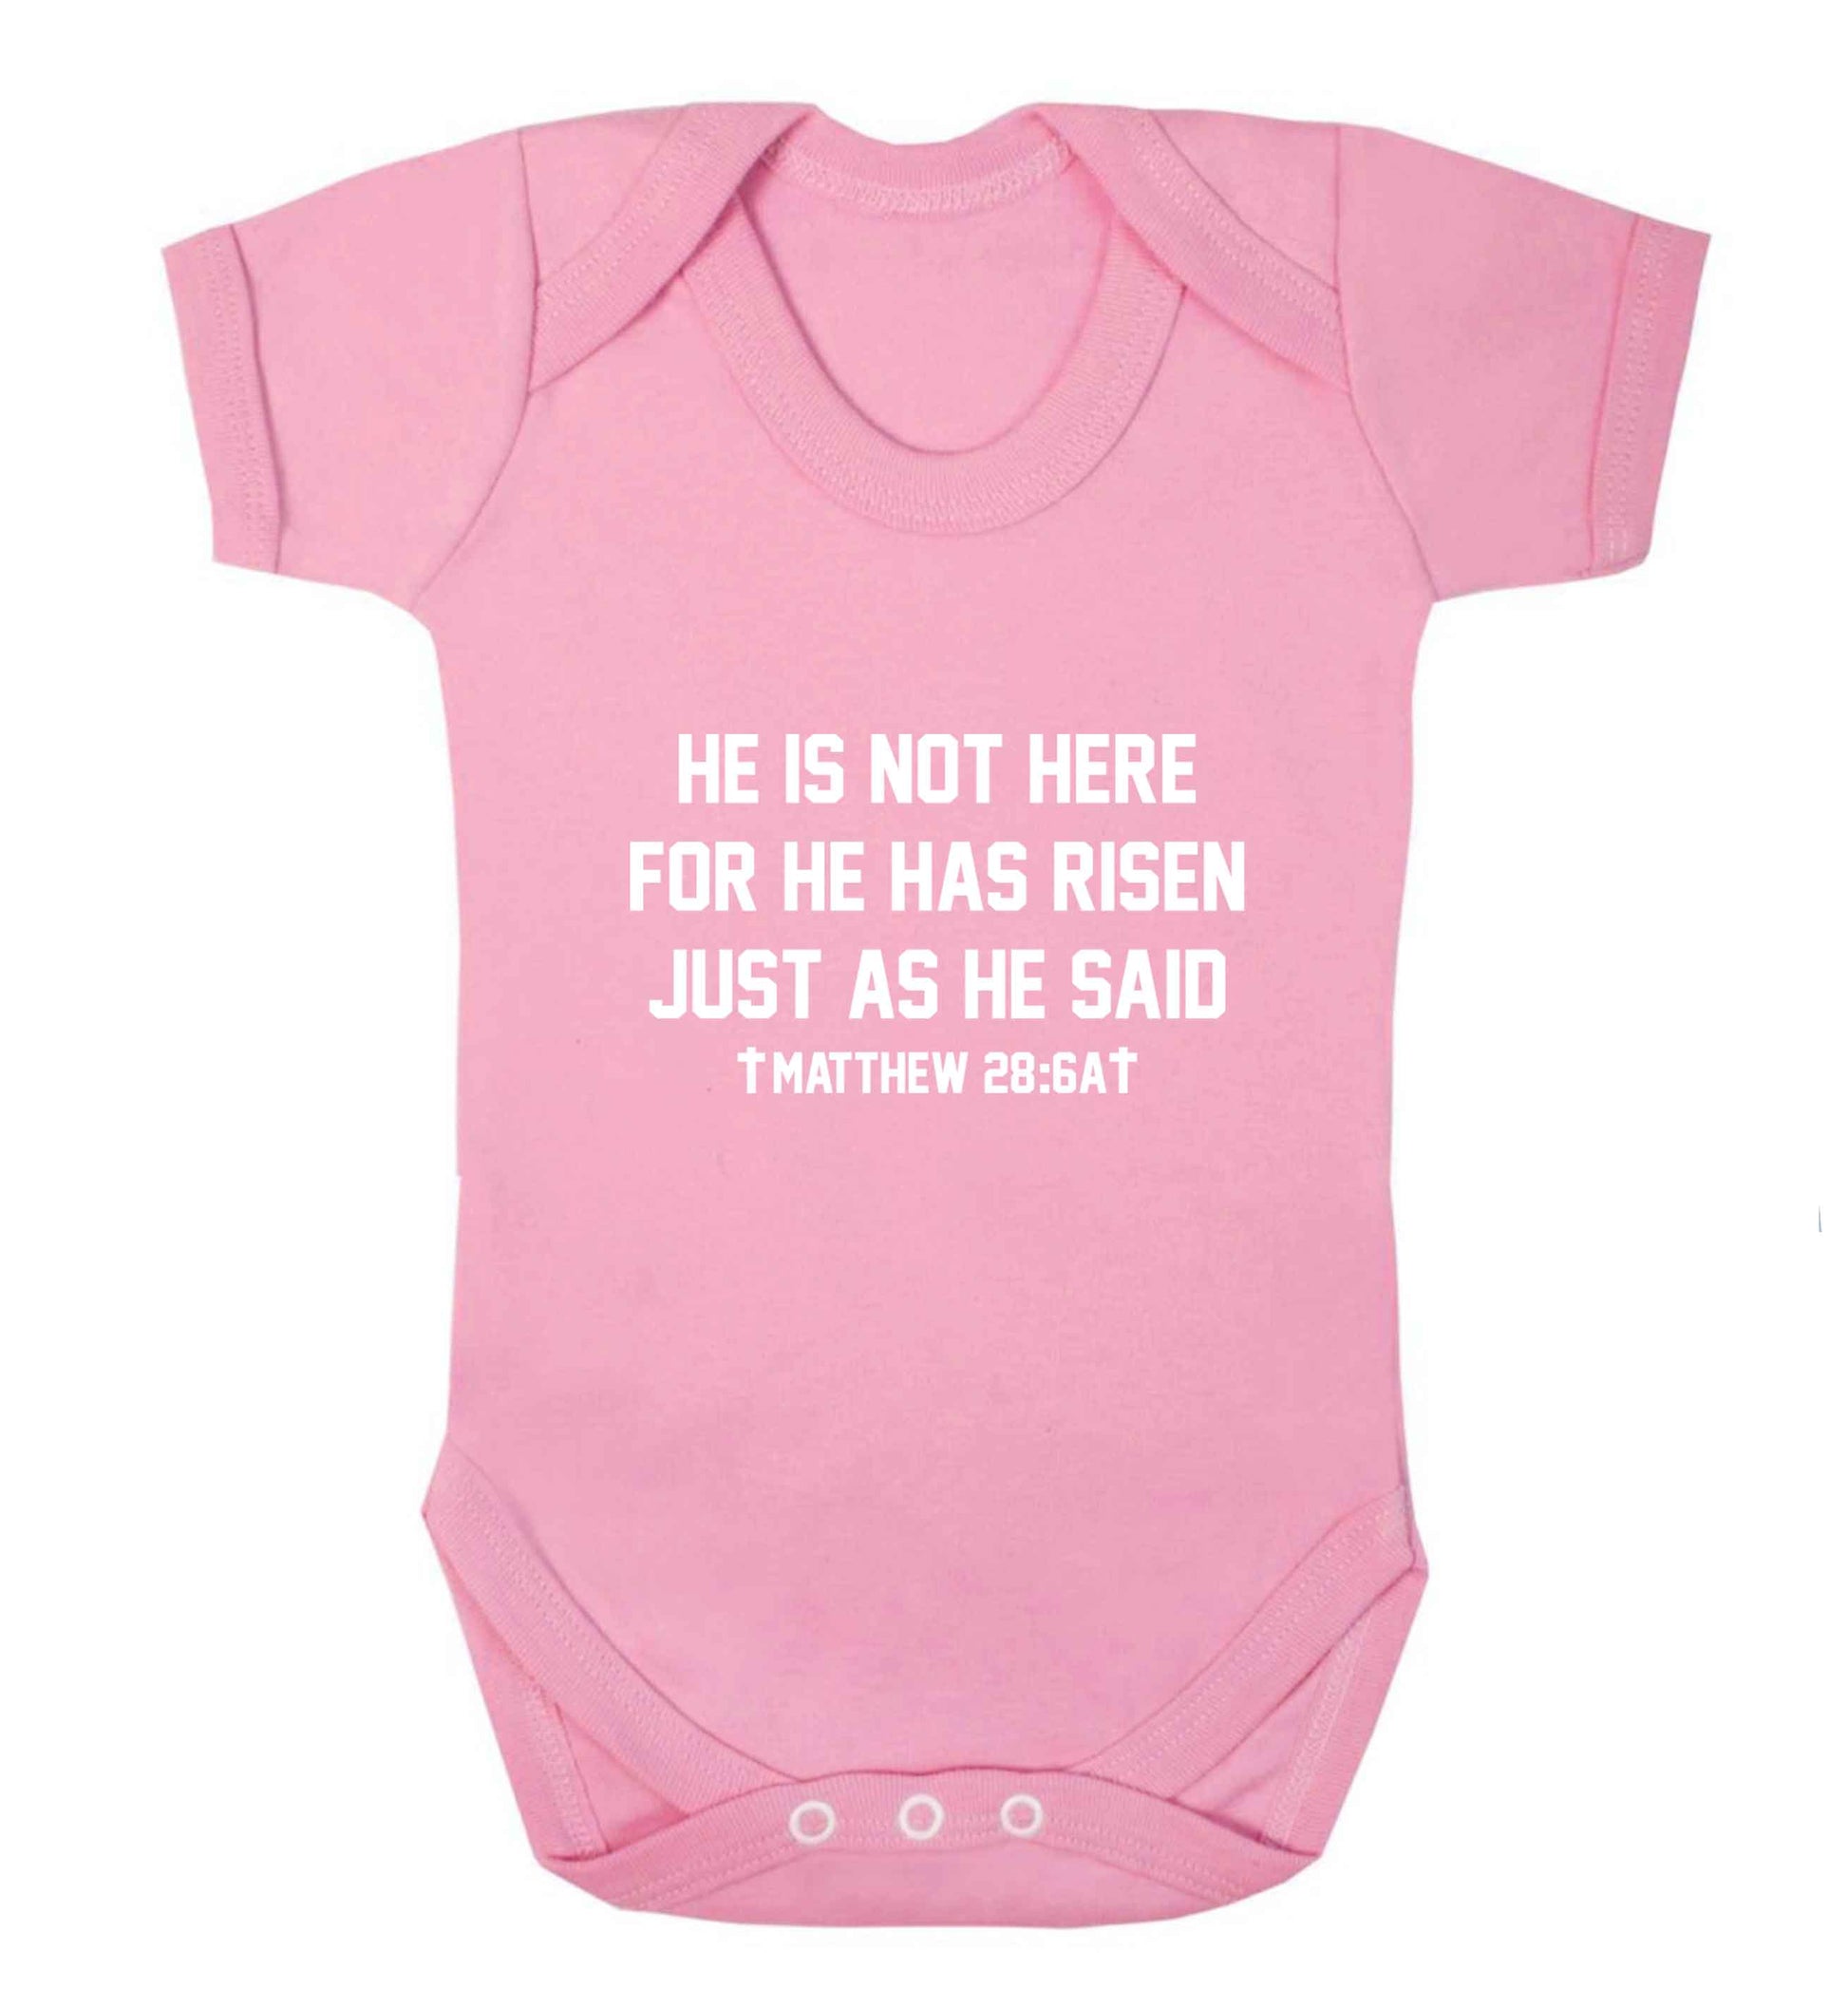 He is not here for he has risen just as he said matthew 28:6A baby vest pale pink 18-24 months